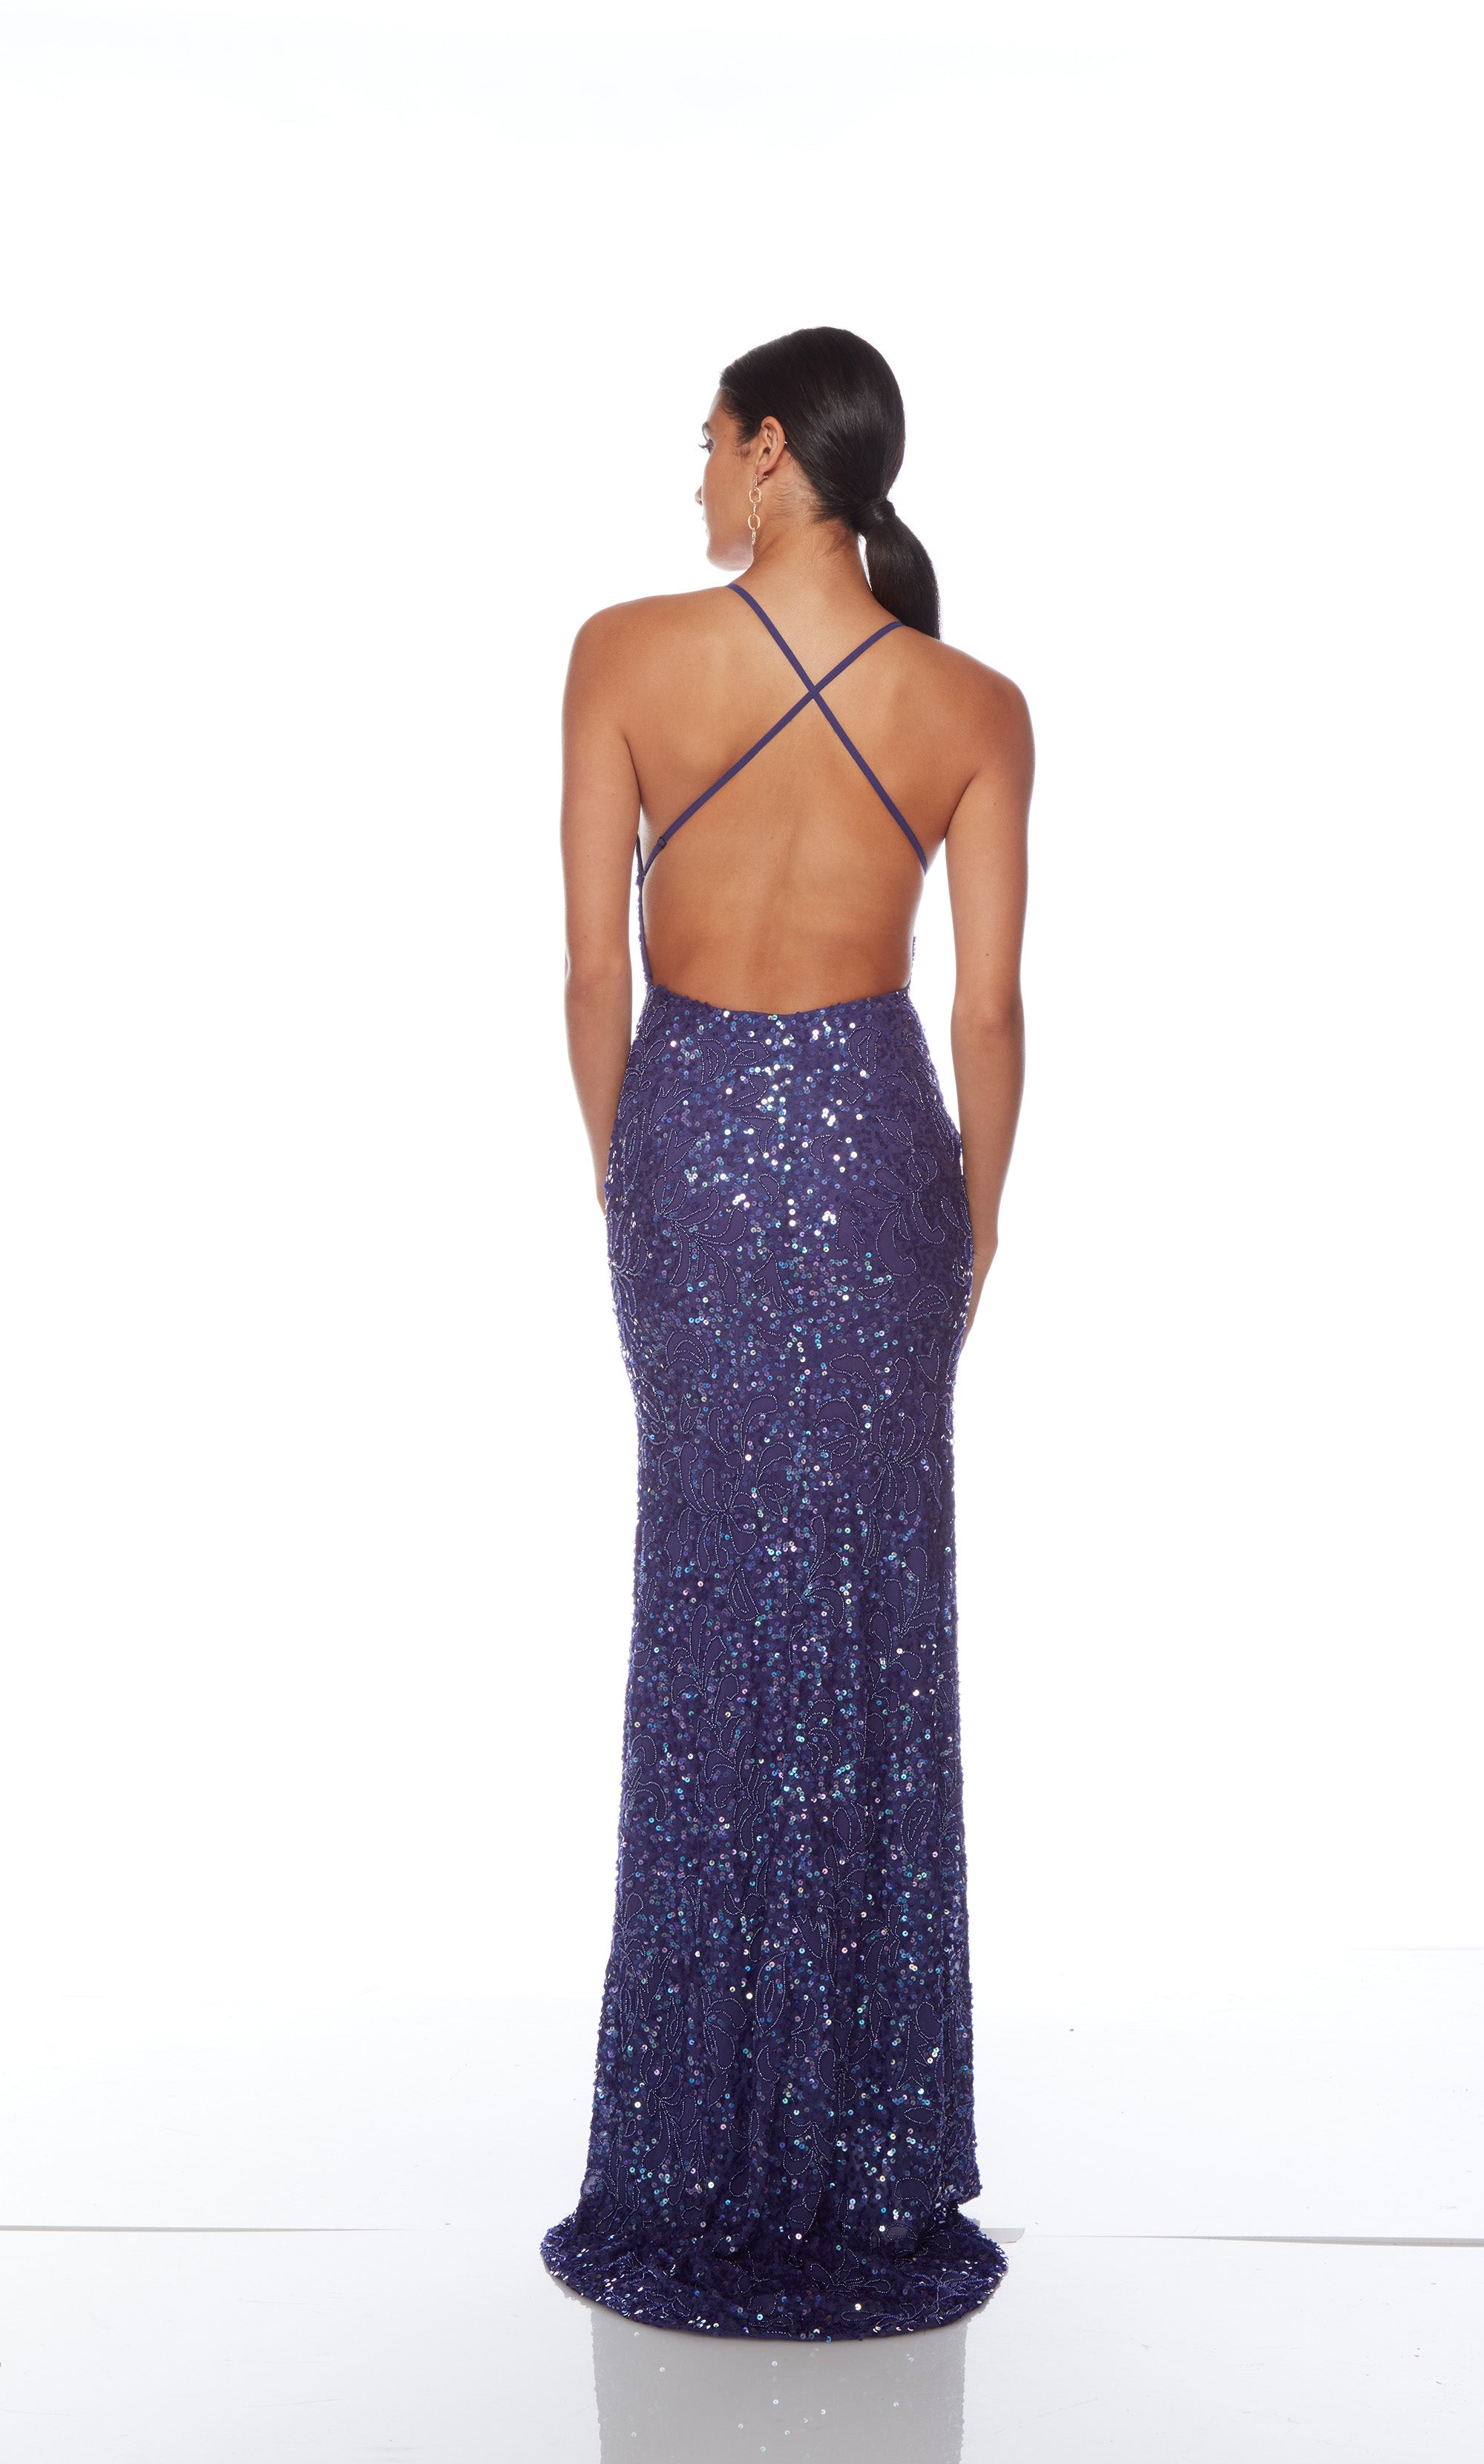 Elegant purple formal gown: Hand-beaded, V neckline, spaghetti straps, strappy back, and intricate design plus fringe accents for an chic and sophisticated look.